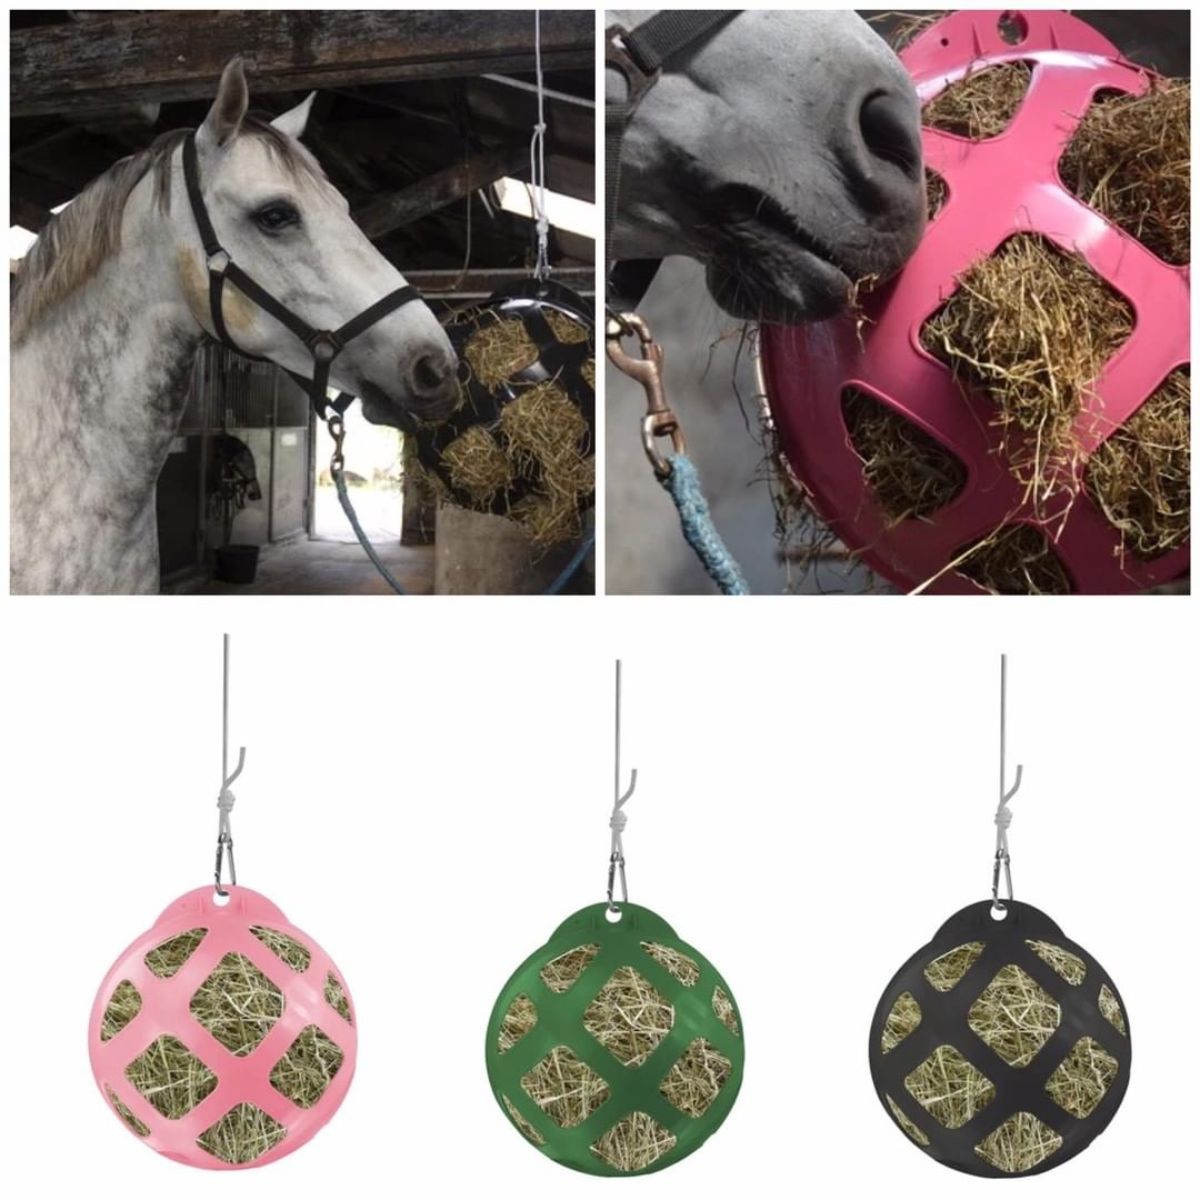 Images of a hanging ball slow feeder for horses.